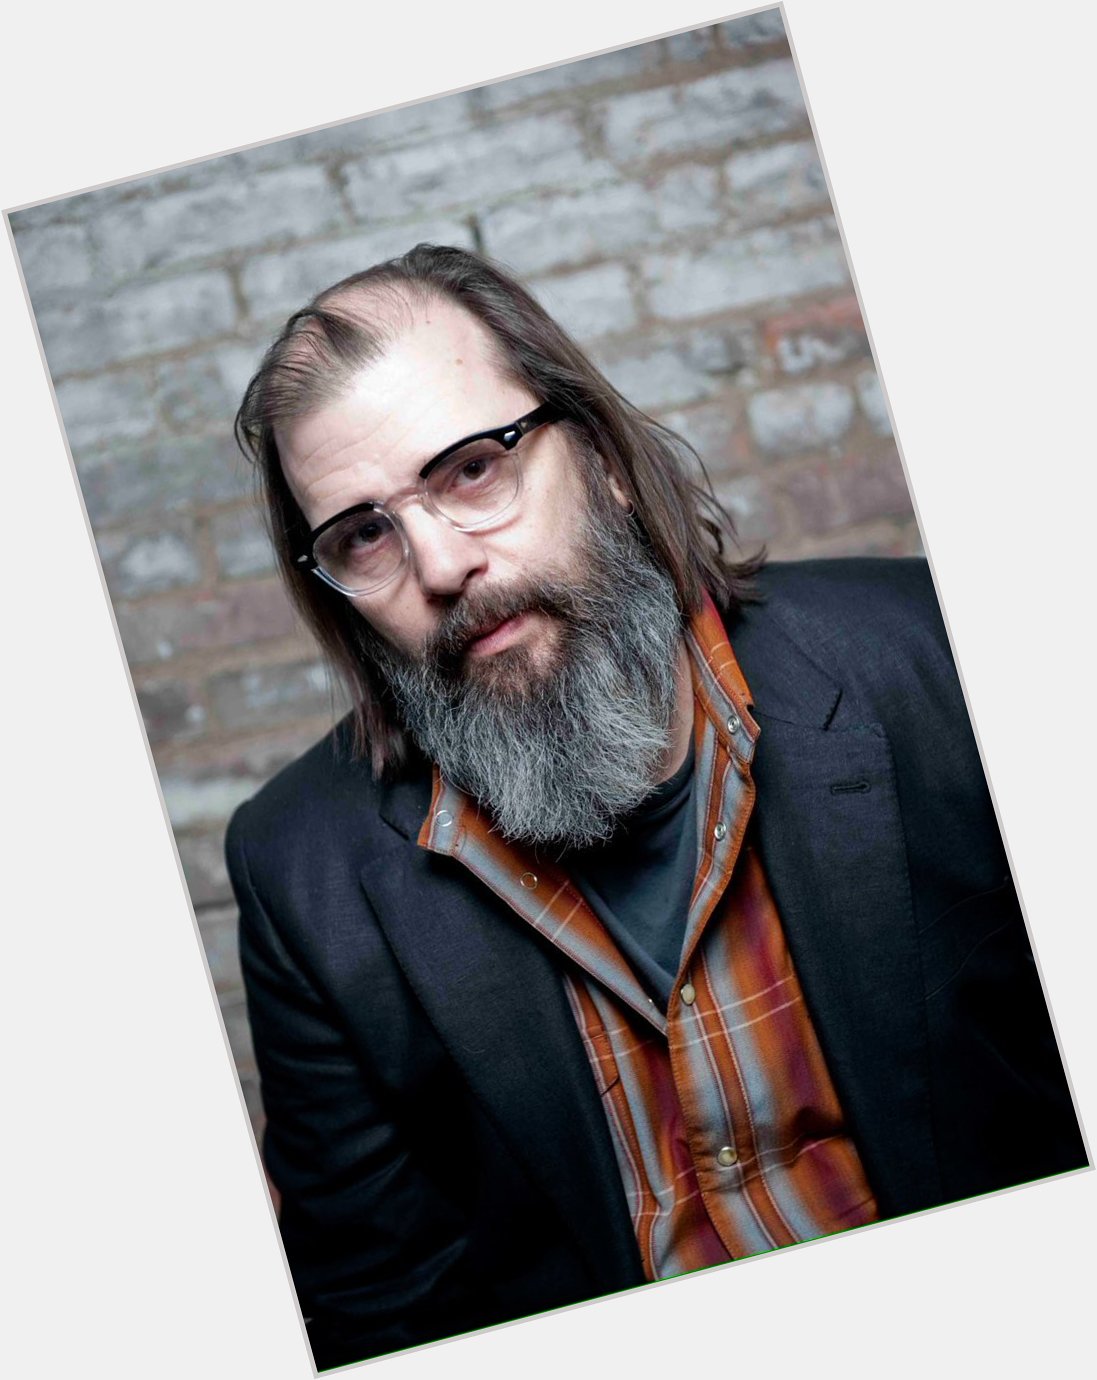 I took my pistol and a hundred dollar bill,
I had everything I need to get me killed.
- Happy birthday Steve Earle. 